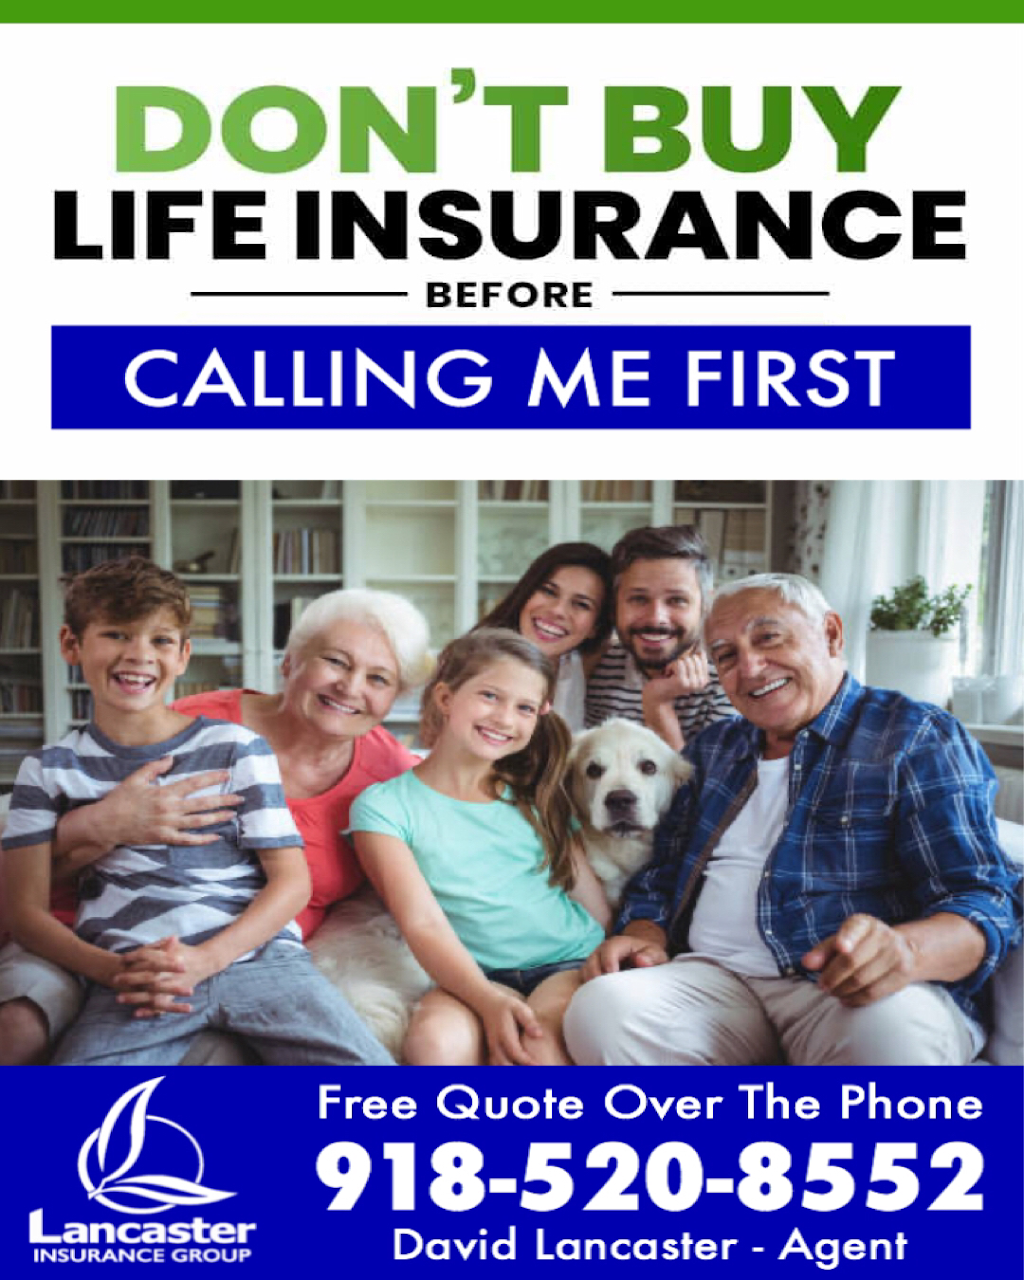 Lancaster Insurance Group | 2522 S Berry Rd, Norman, OK 73072, USA | Phone: (918) 520-8552